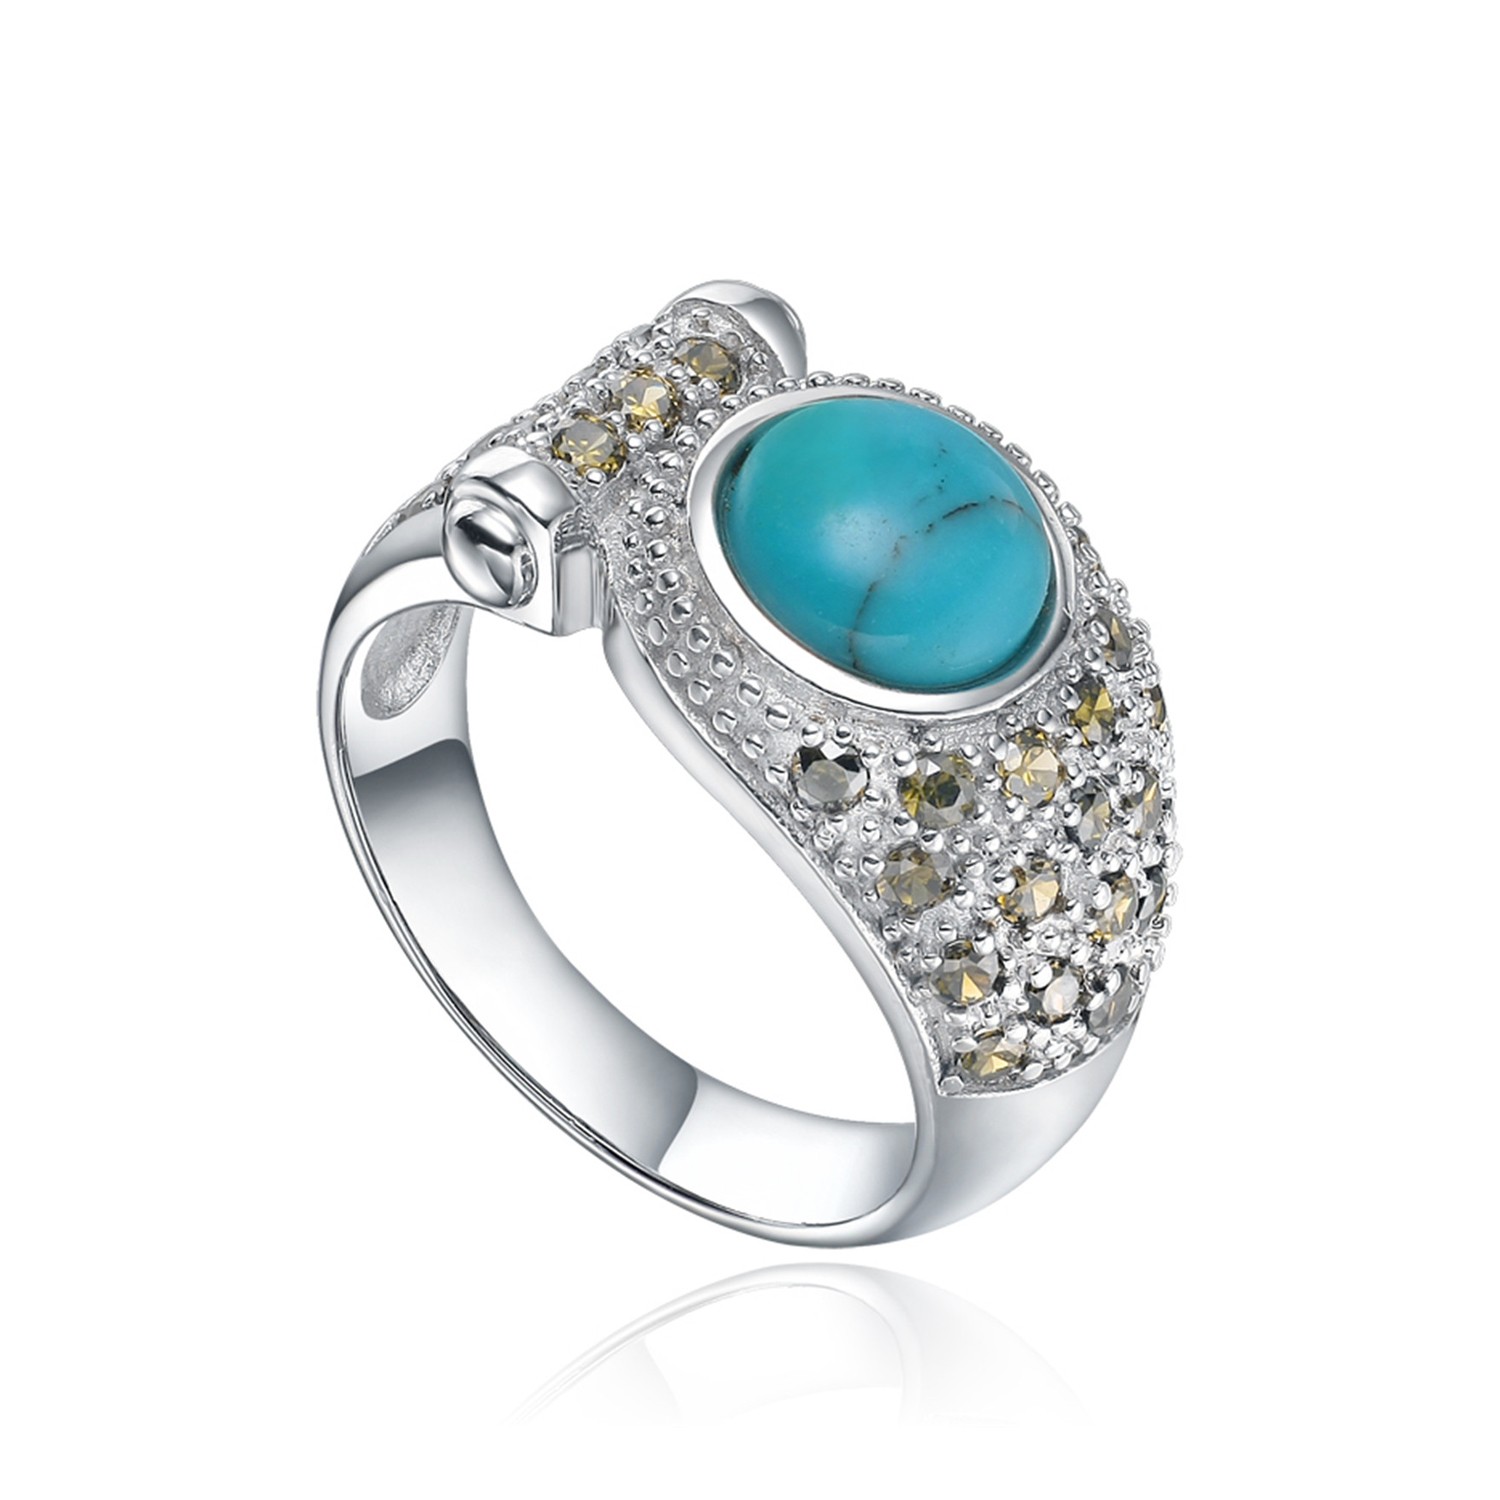 Ready to Ship Wholesale silver jewelry rings jewelry women sterling silver ring turquoise ring